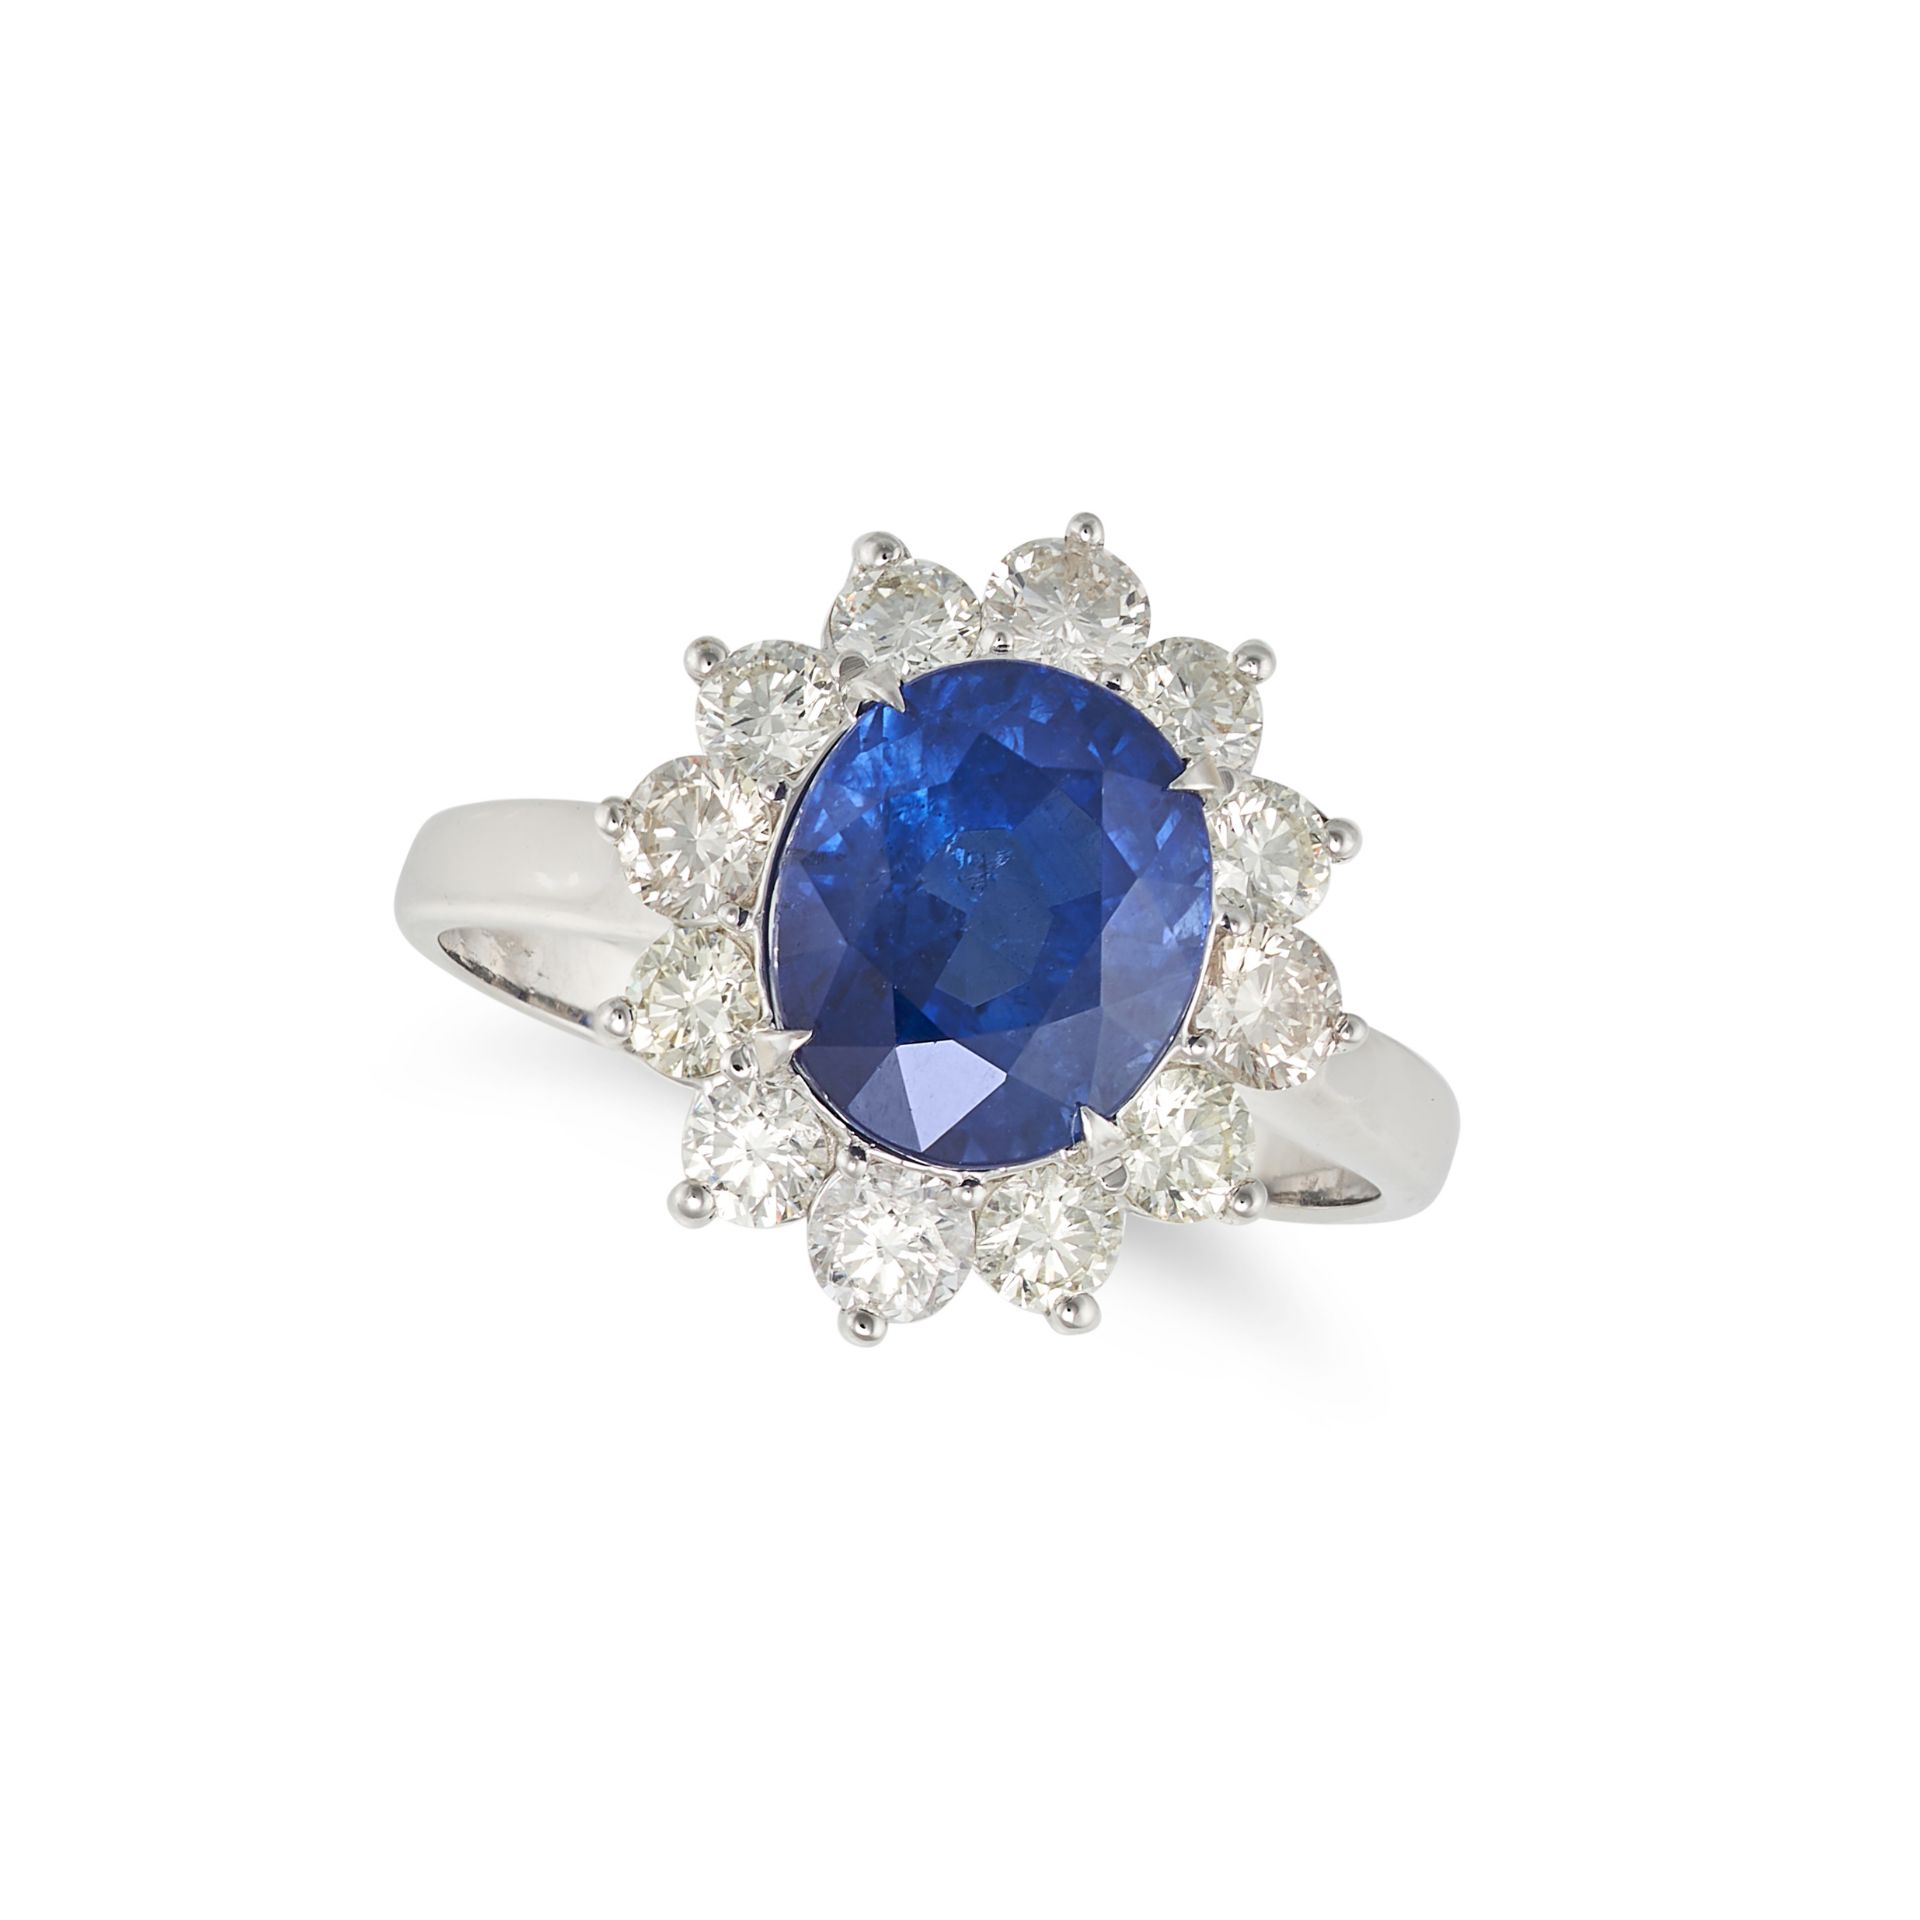 A SAPPHIRE AND DIAMOND CLUSTER RING in 18ct white gold, set with an oval cut sapphire of 3.02 car...